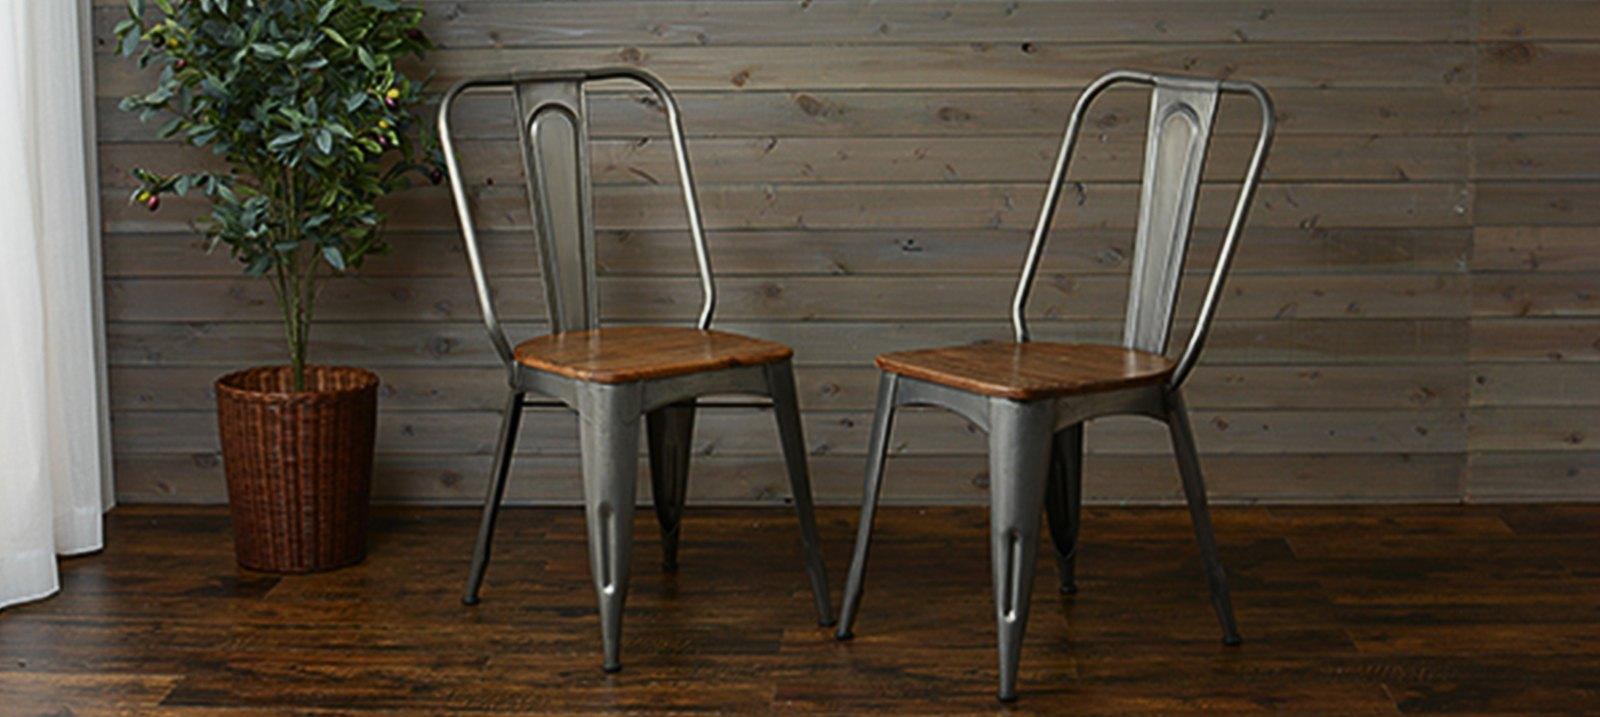 INDUSTRIAL FURNITURE BY HAGIHARA